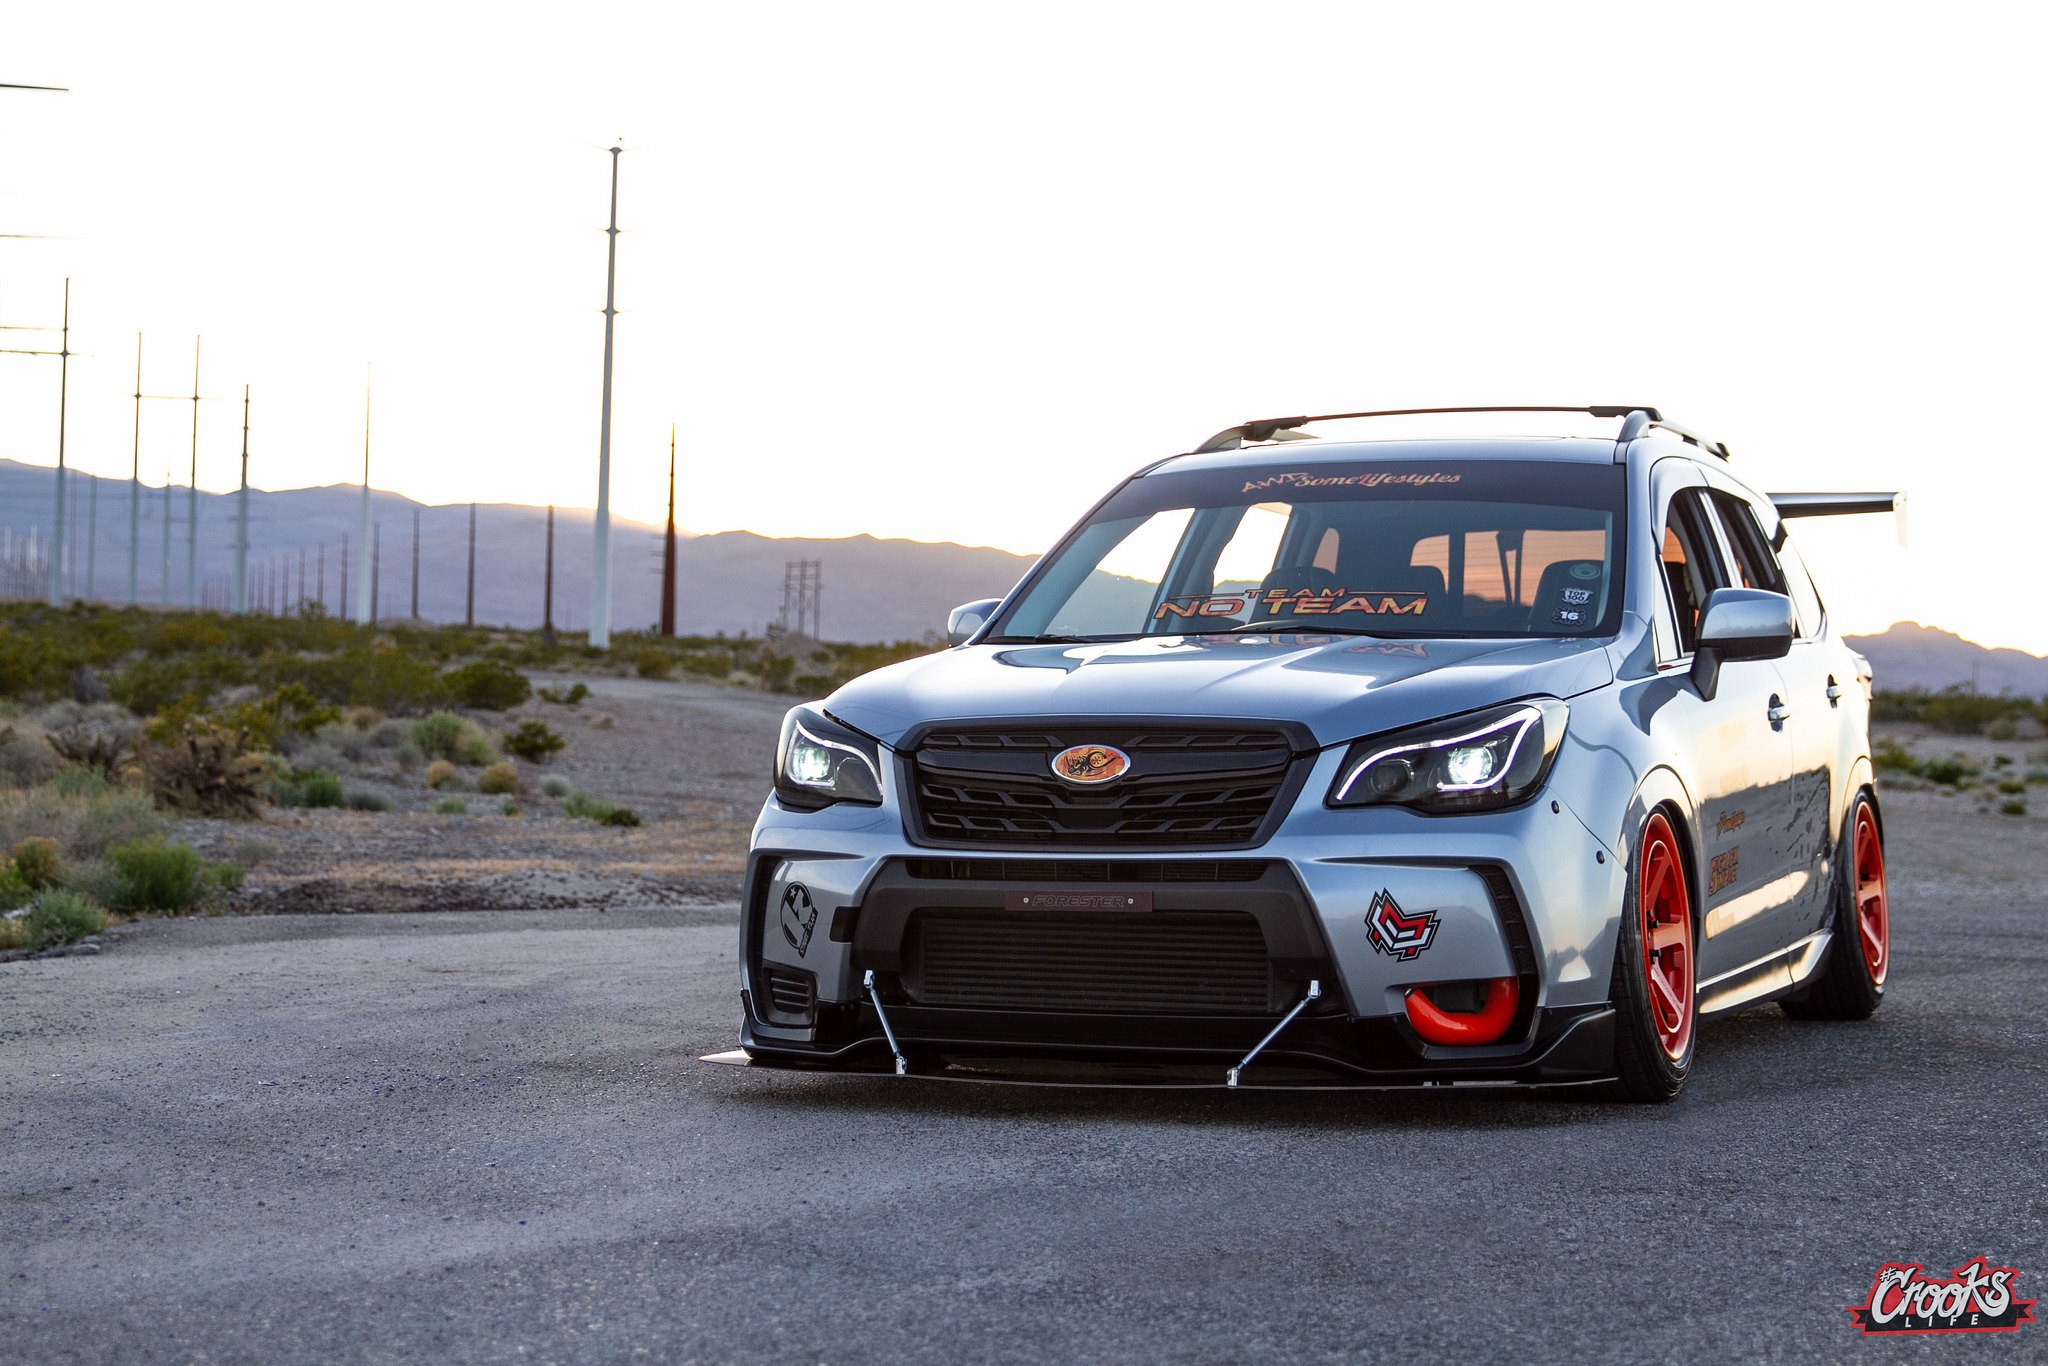 Custom Painted Stanced Debadged Subaru Forester - Photo by Jimmy Crook